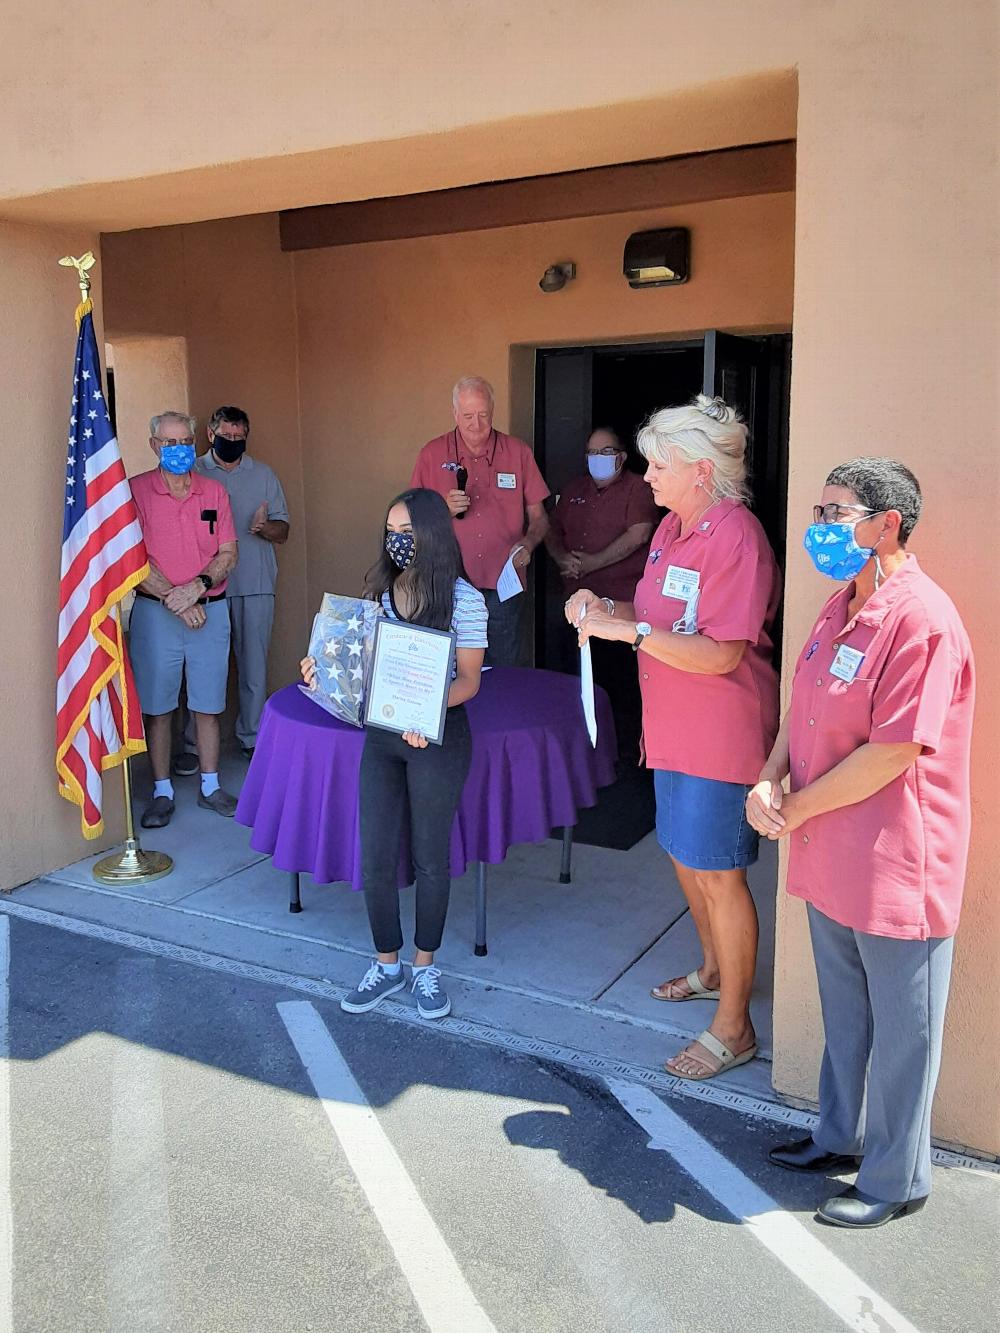 Tucson Elks Lodge @385  Americanism
Essay Contest winner for 6-2020.
Participants in this program write essays on patriotic themes selected by the
local Lodge Americanism Committee
and compete for National Recognition
and other awards. The Lodge Contest included schools within the jurisdiction of the Lodge.
Pictured with 2020 winner are Lodge officers.   